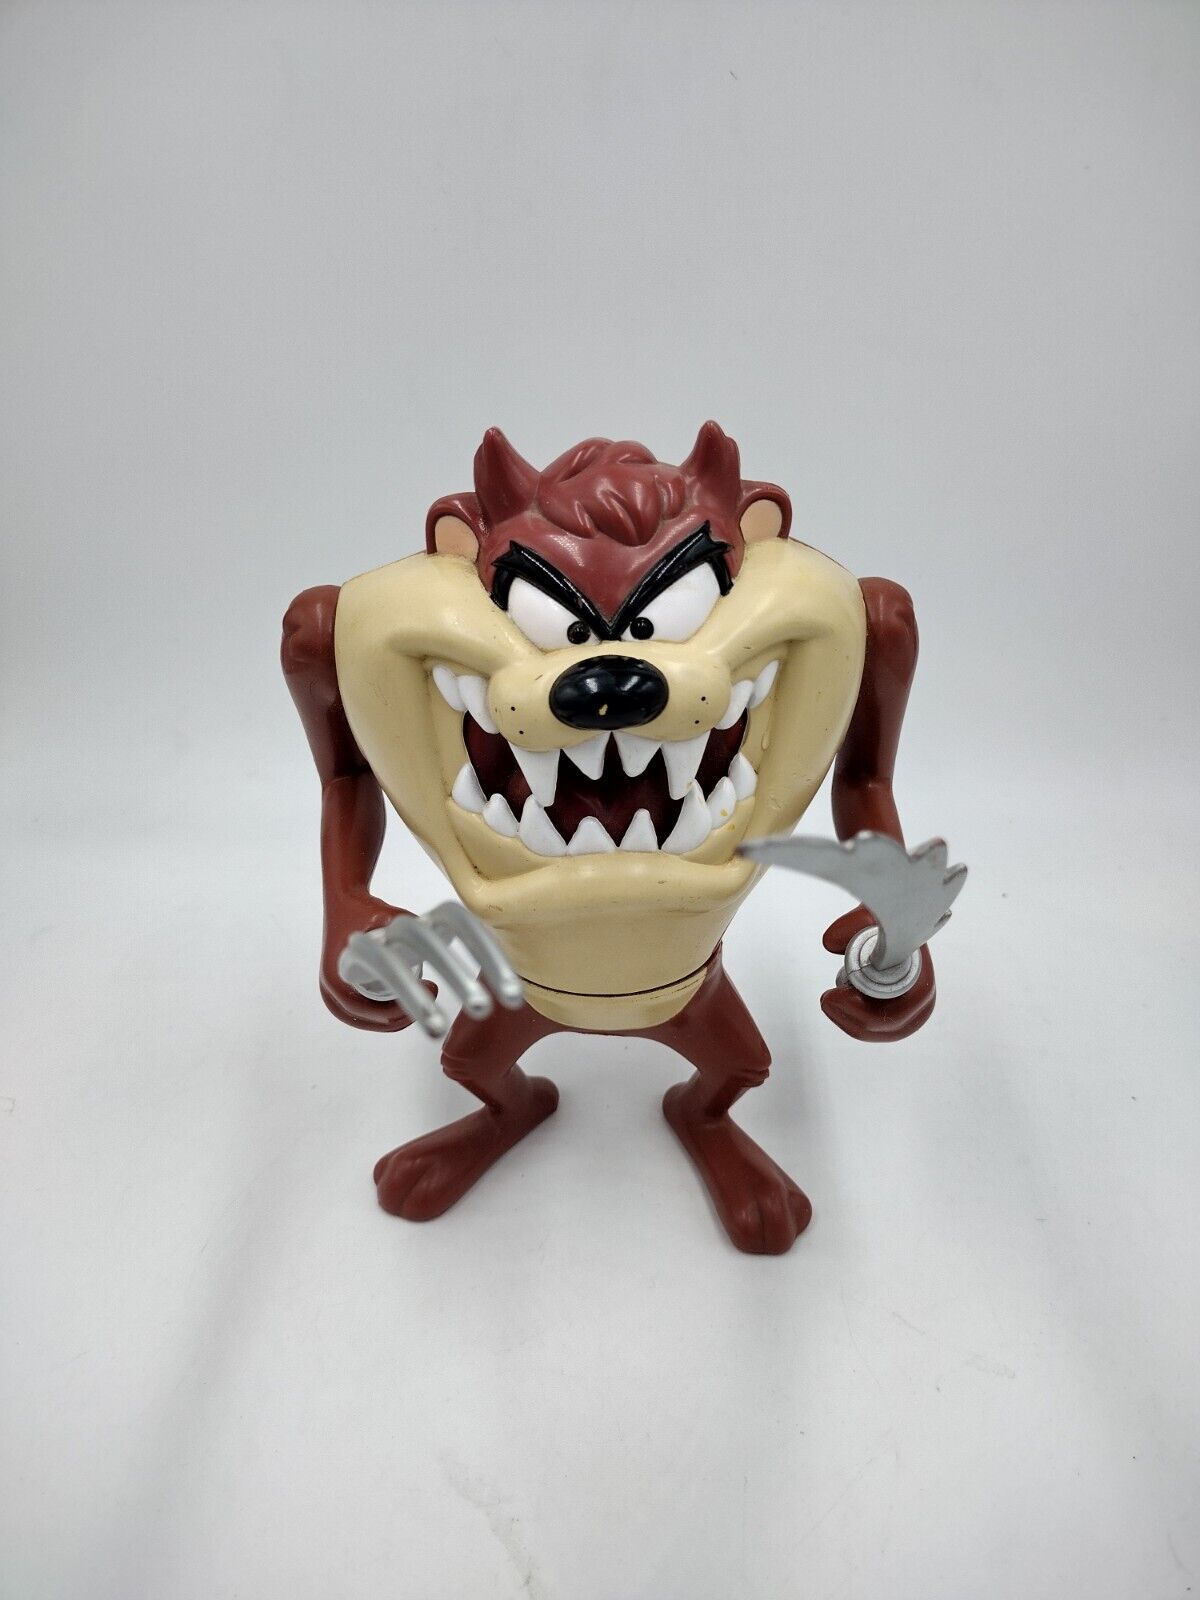 Tyco Vintage 1993 Tasmanian Devil Talking Figure, Battery Included And Works